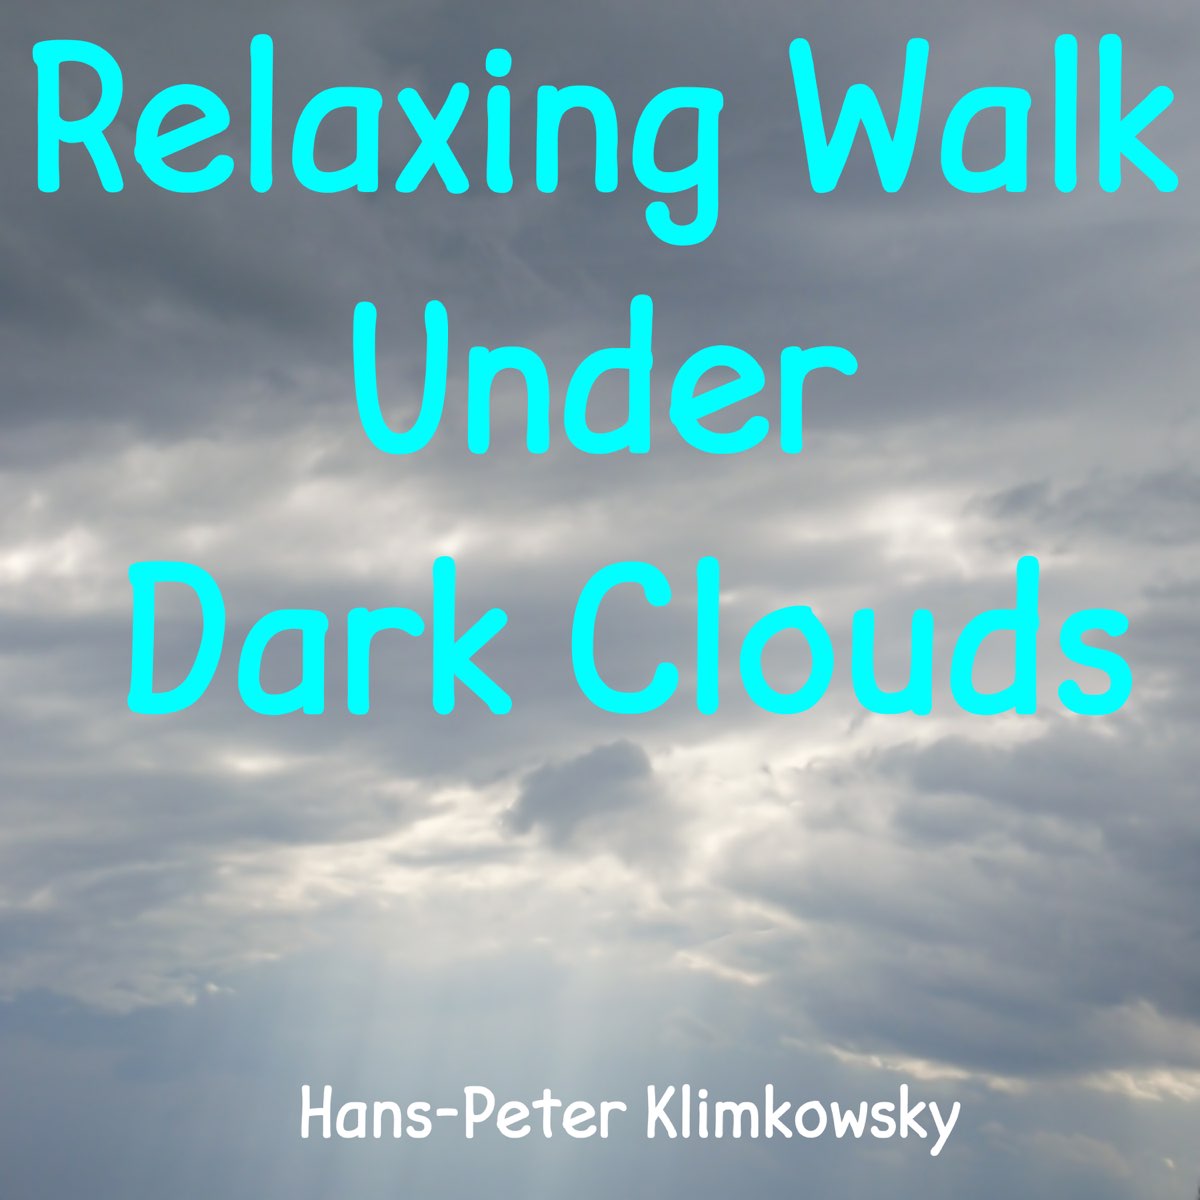 Relaxing on a Rainy Day in Spring, pt. 1 От Hans-Peter Klimkowsky Ноты для фортепиано. Relaxing on a beautiful morning Reloaded for Piano solo Hans-Peter Klimkowsky. Relaxing walks